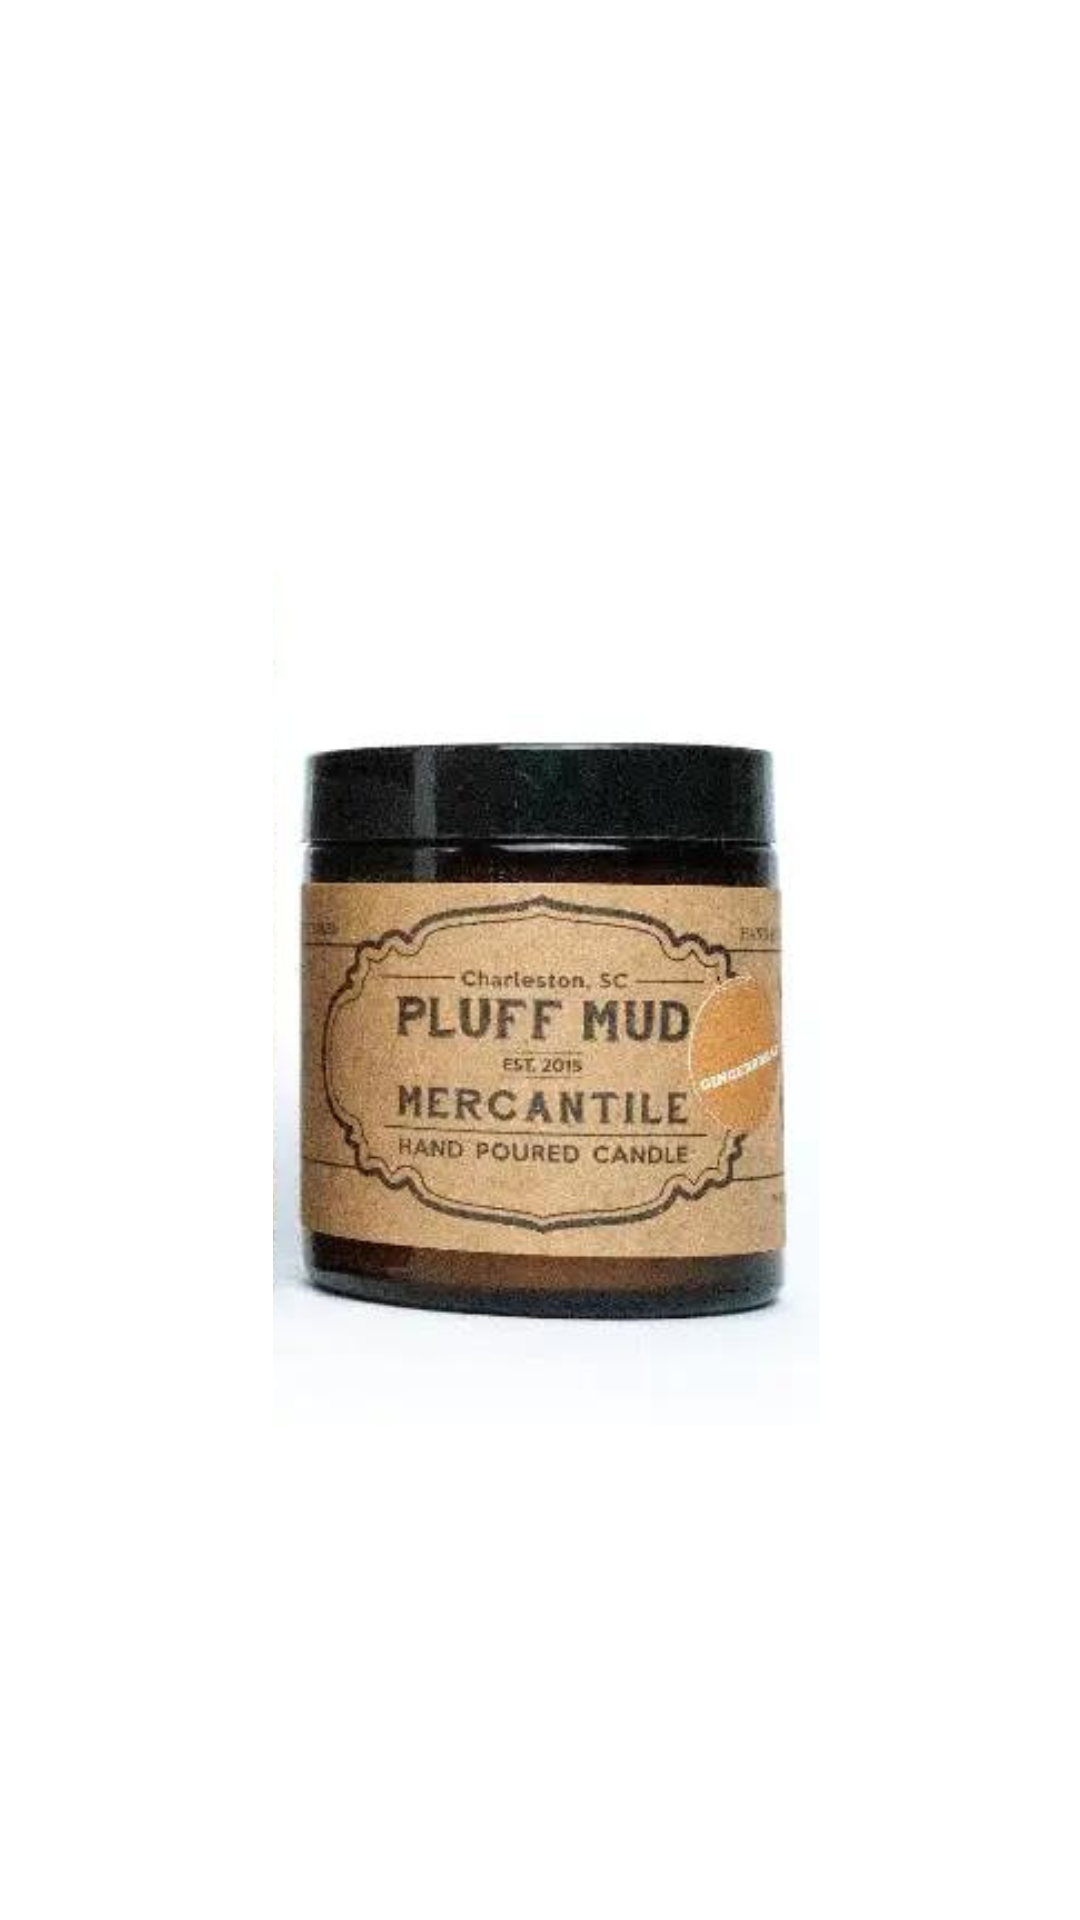 Baked Apple Hand Poured Soy Candle - Pluff Mud Mercantile